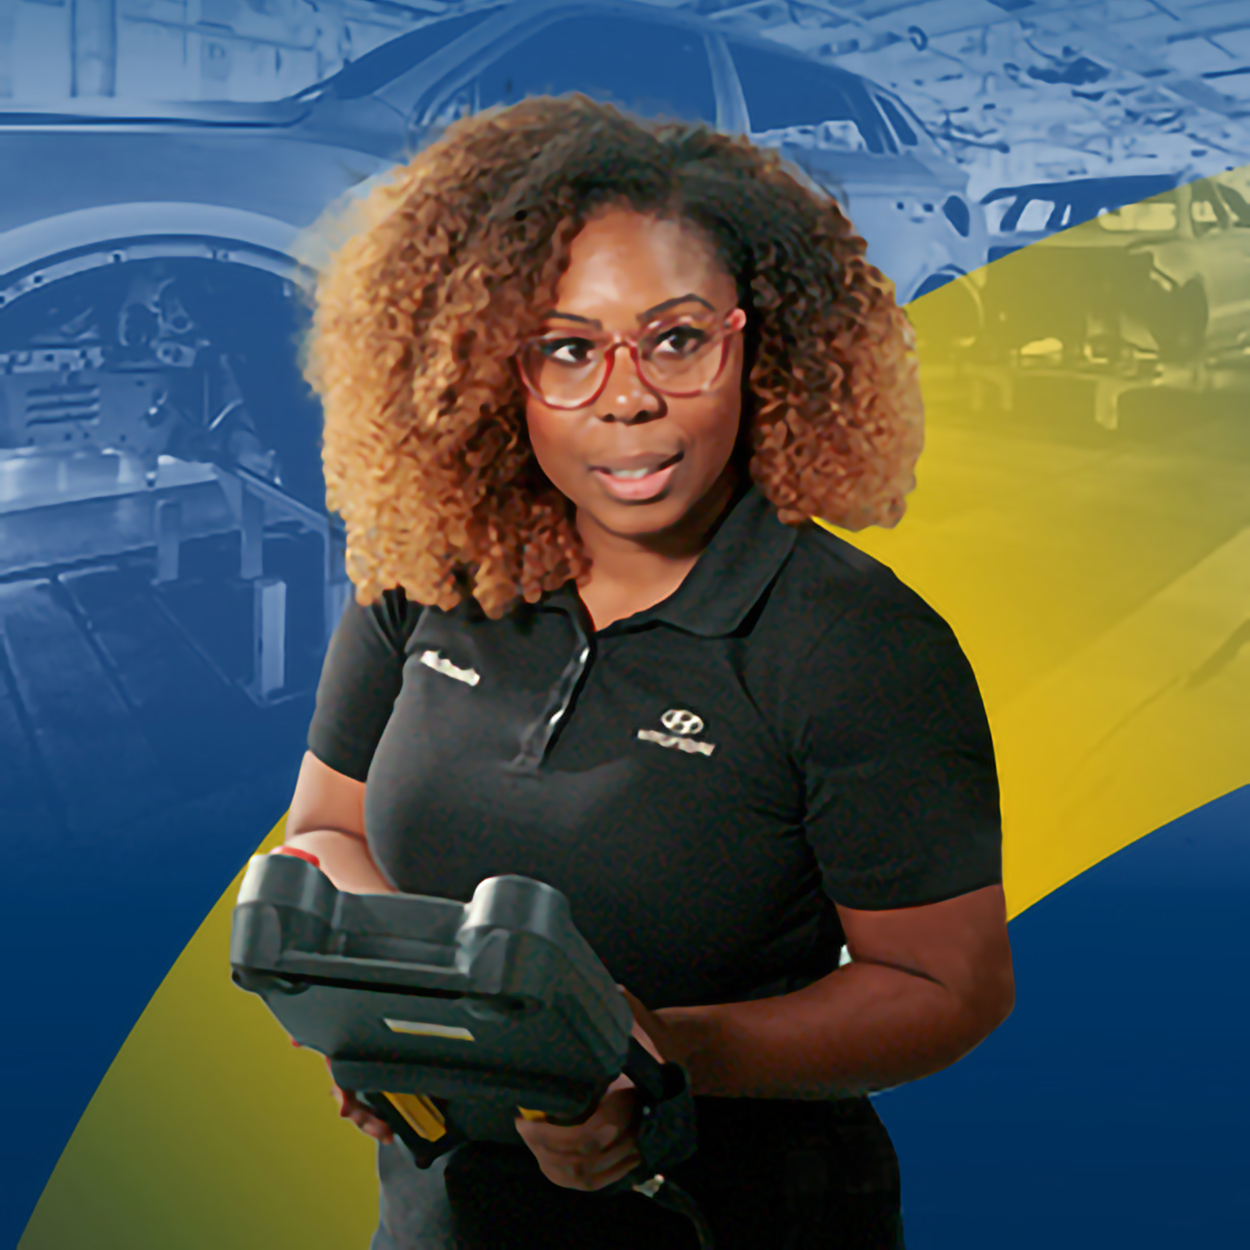 A woman with curly hair, wearing glasses and a black polo shirt, holds a diagnostic tool in a car manufacturing plant. The background features images of cars being assembled on a production line with a blue and yellow gradient overlay.